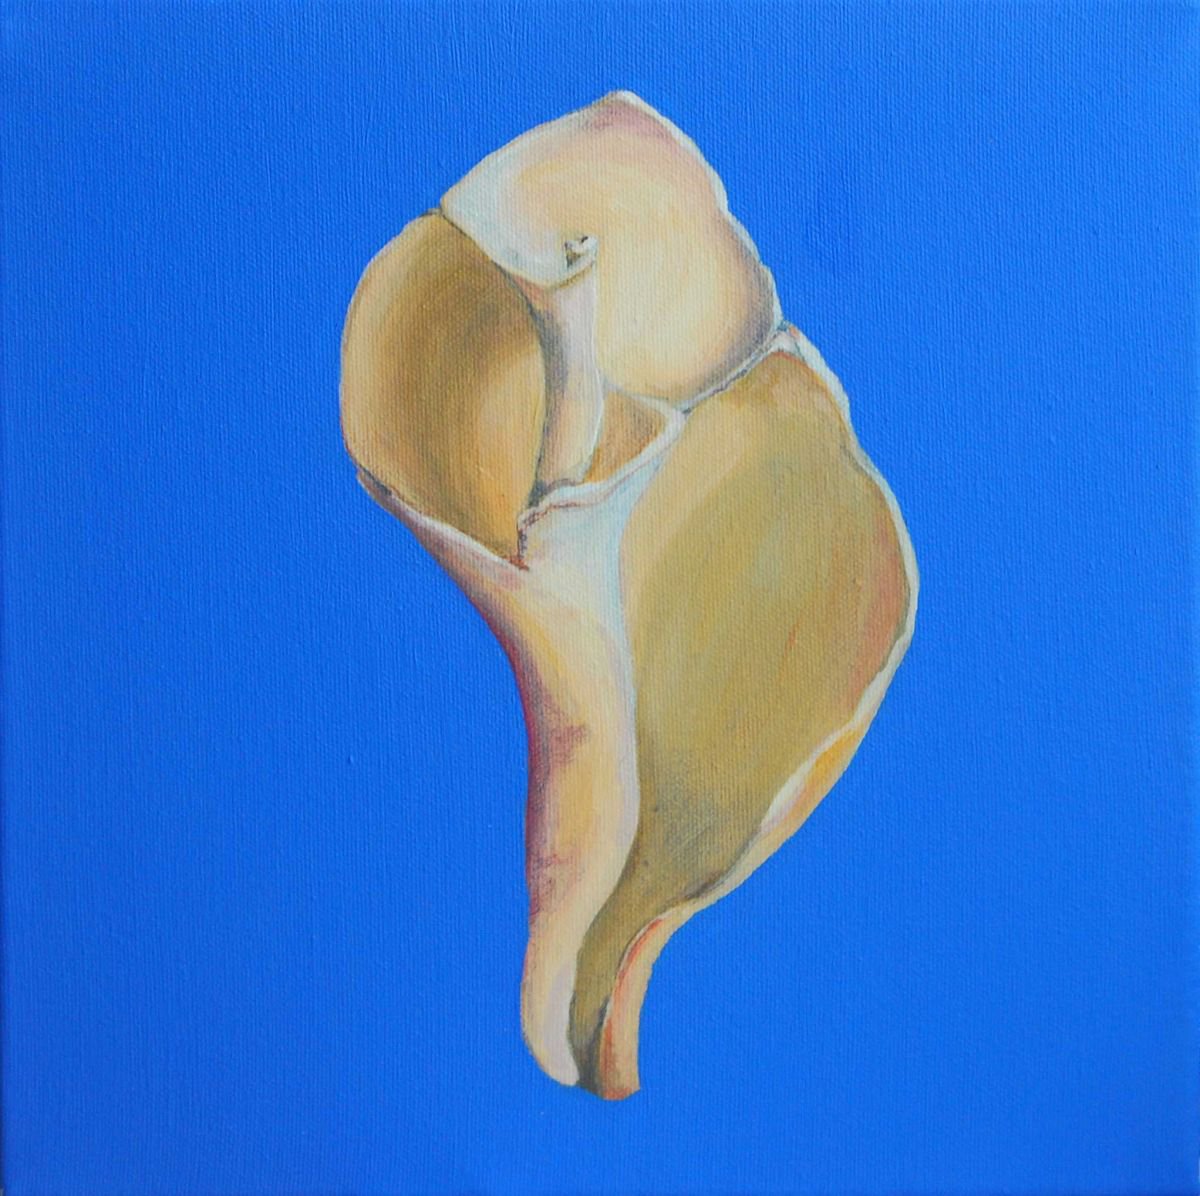 Whelk Shell #2 - Square Minimal Contemporary Painting Inspired by Georgia O'Keeffe